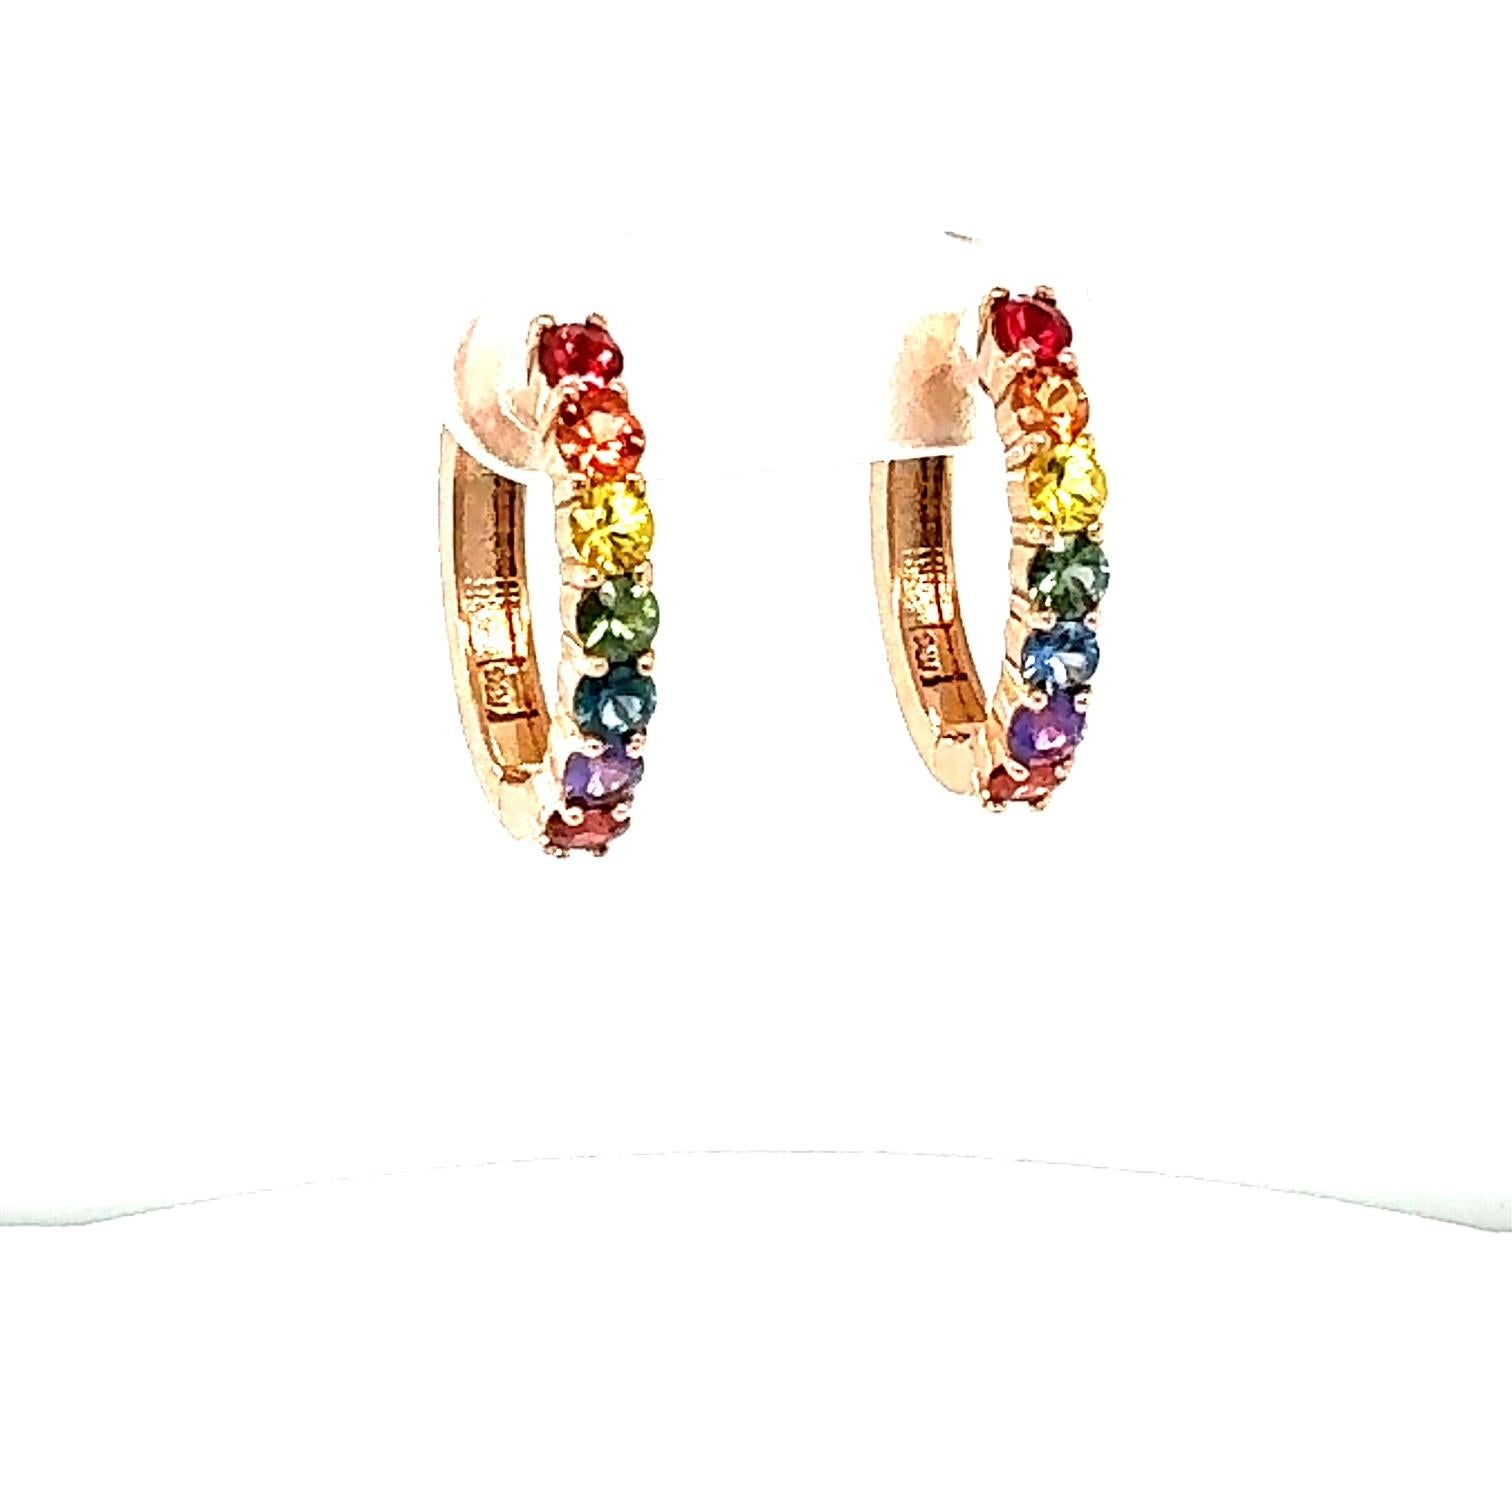 1.99 Carat Rainbow Sapphire Rose Gold Hoop Earrings
Beautiful Everyday Huggy Earrings 

Item Specs:

14 Round Cut Multi-Colored Natural Sapphires weighing 1.99 carats
Total Carat Weight is 1.99 carats
Crafted in 14K Rose Gold approximately 4.3